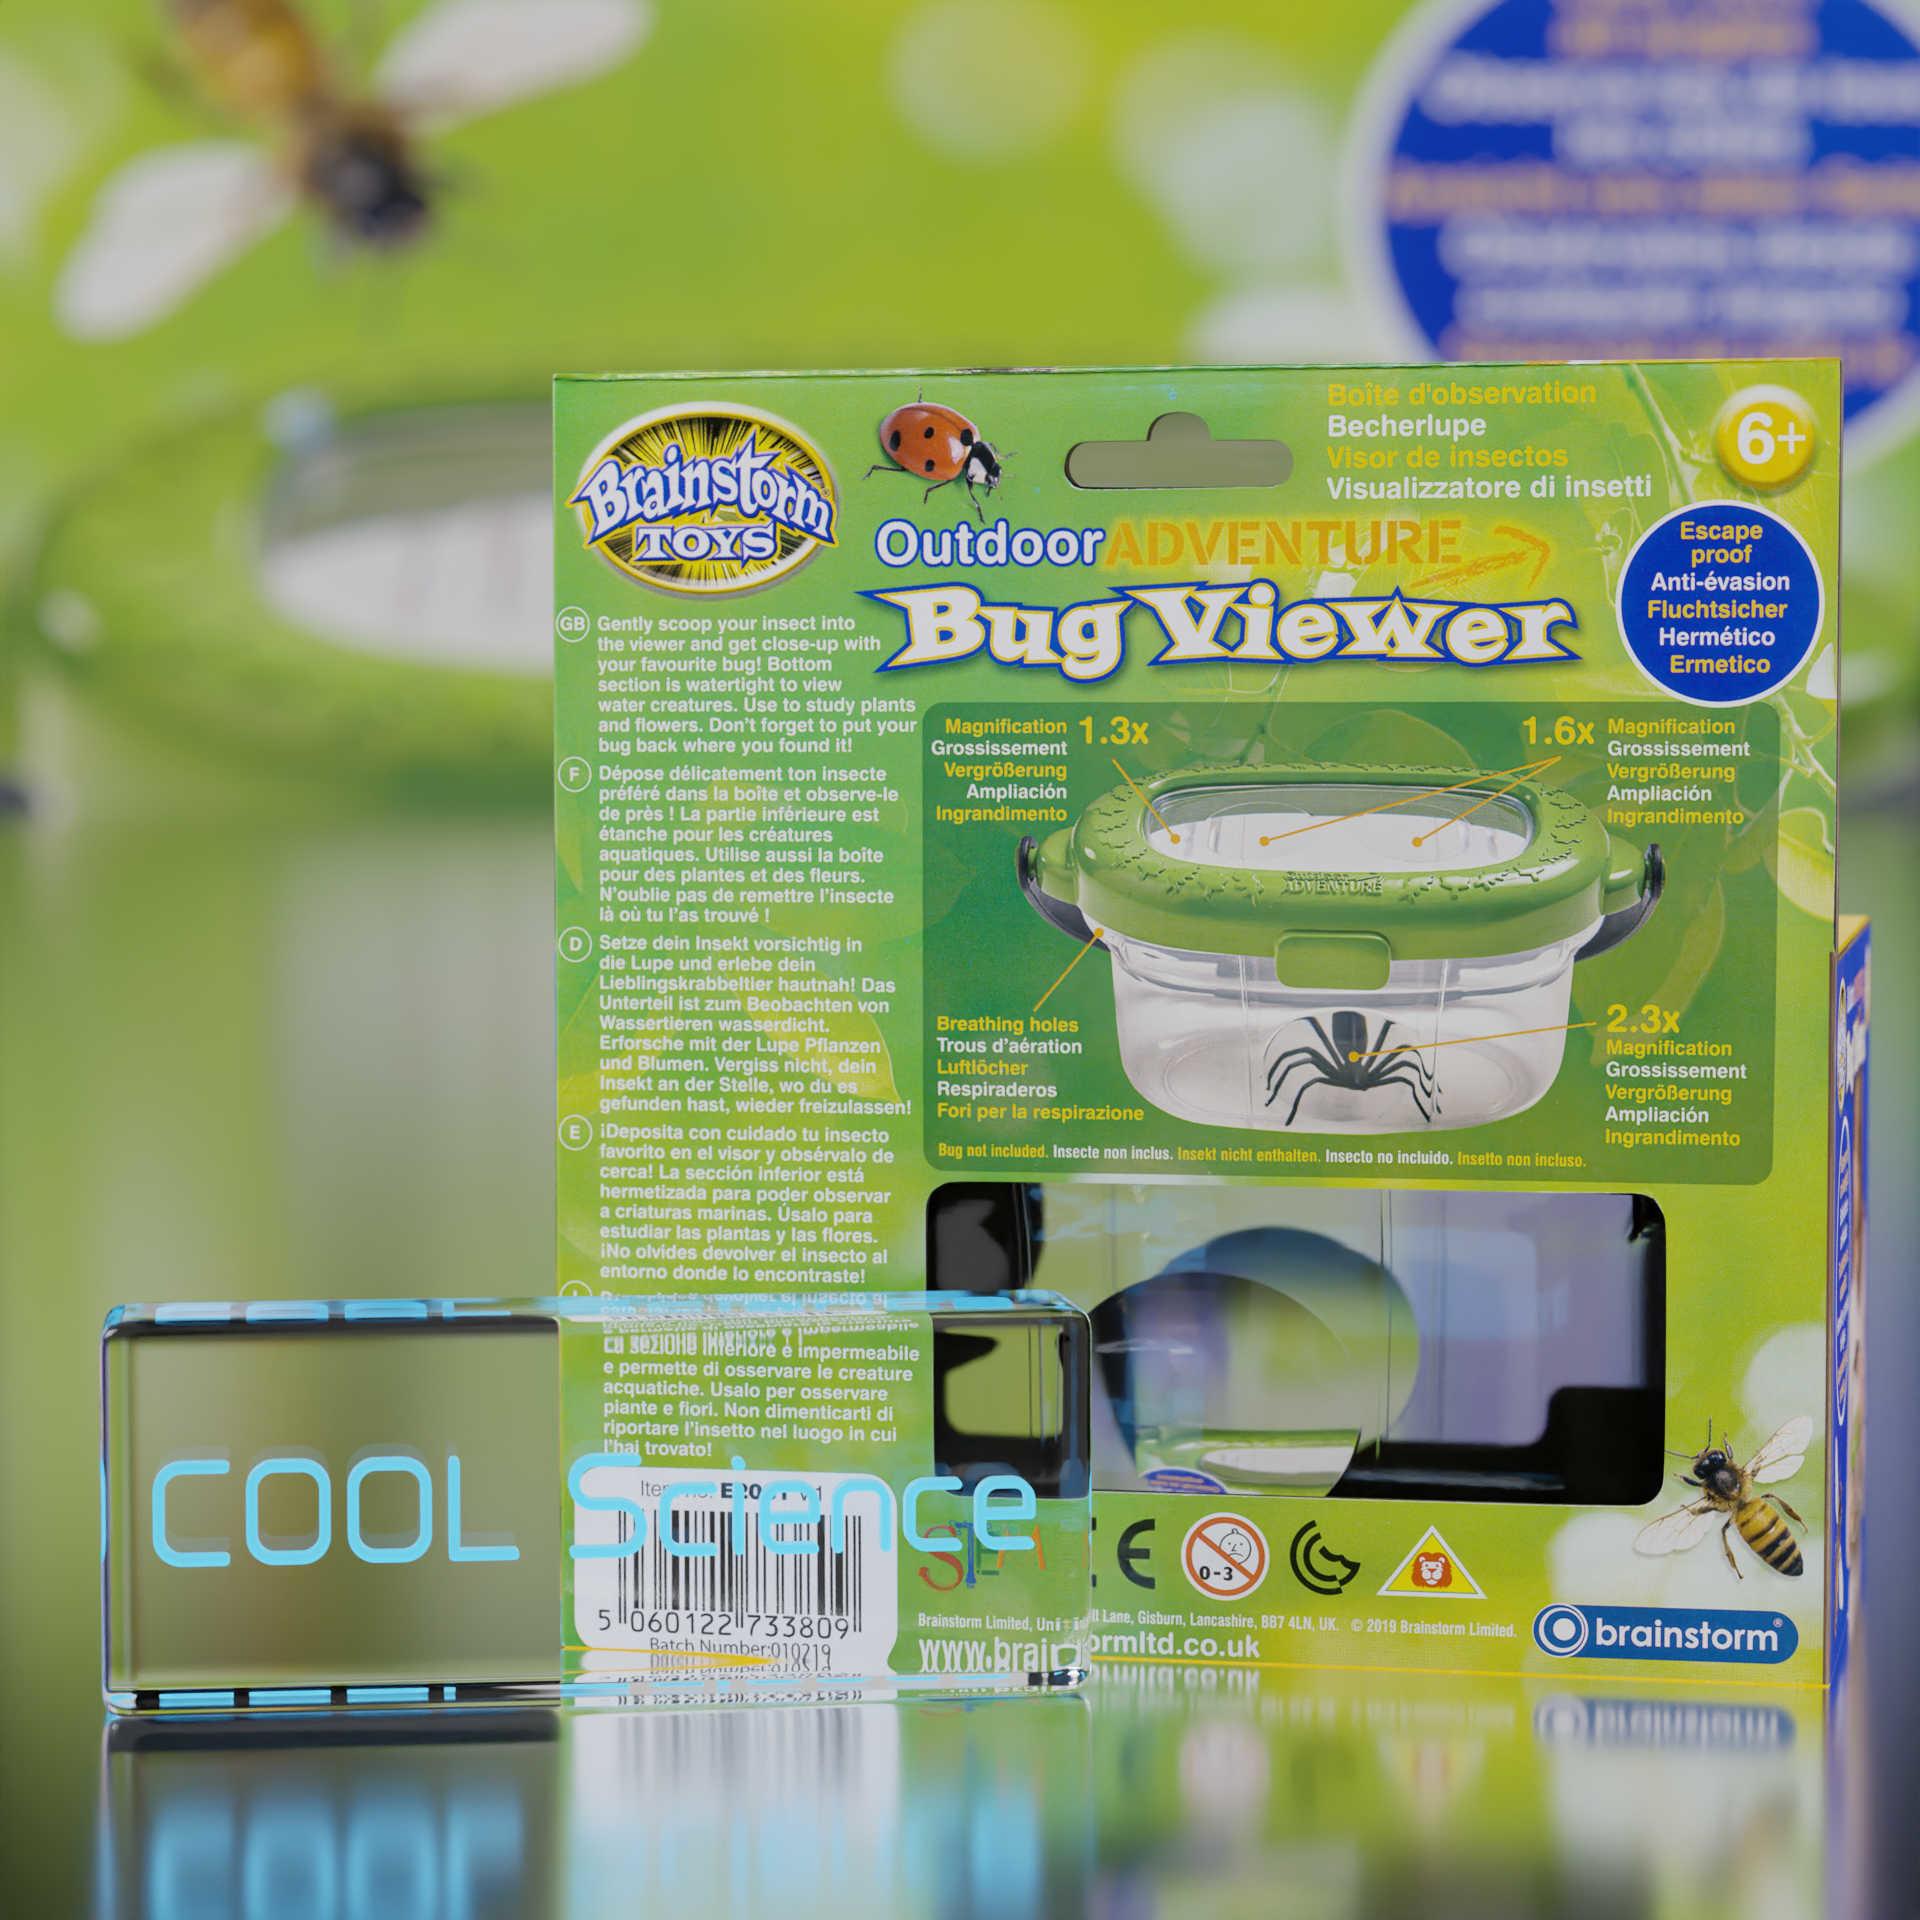 Back View of the Brainstorm Outdoor Adventure Bug Viewer box